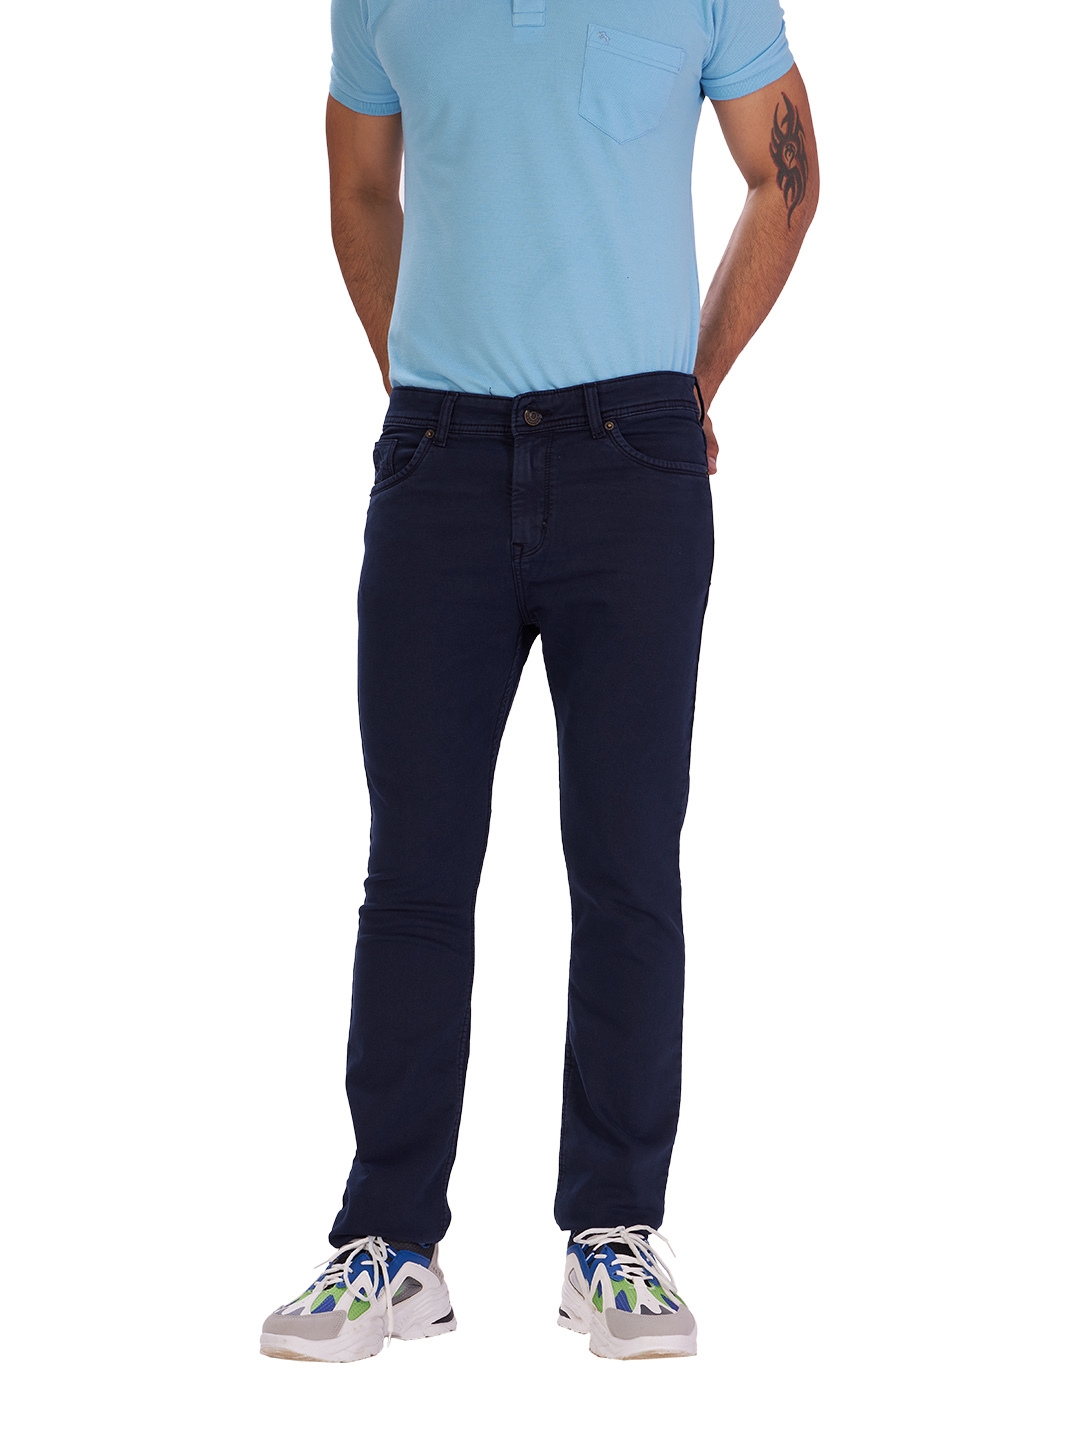 D'cot by Donear | D'cot by Donear Mens Blue Cotton Jeans